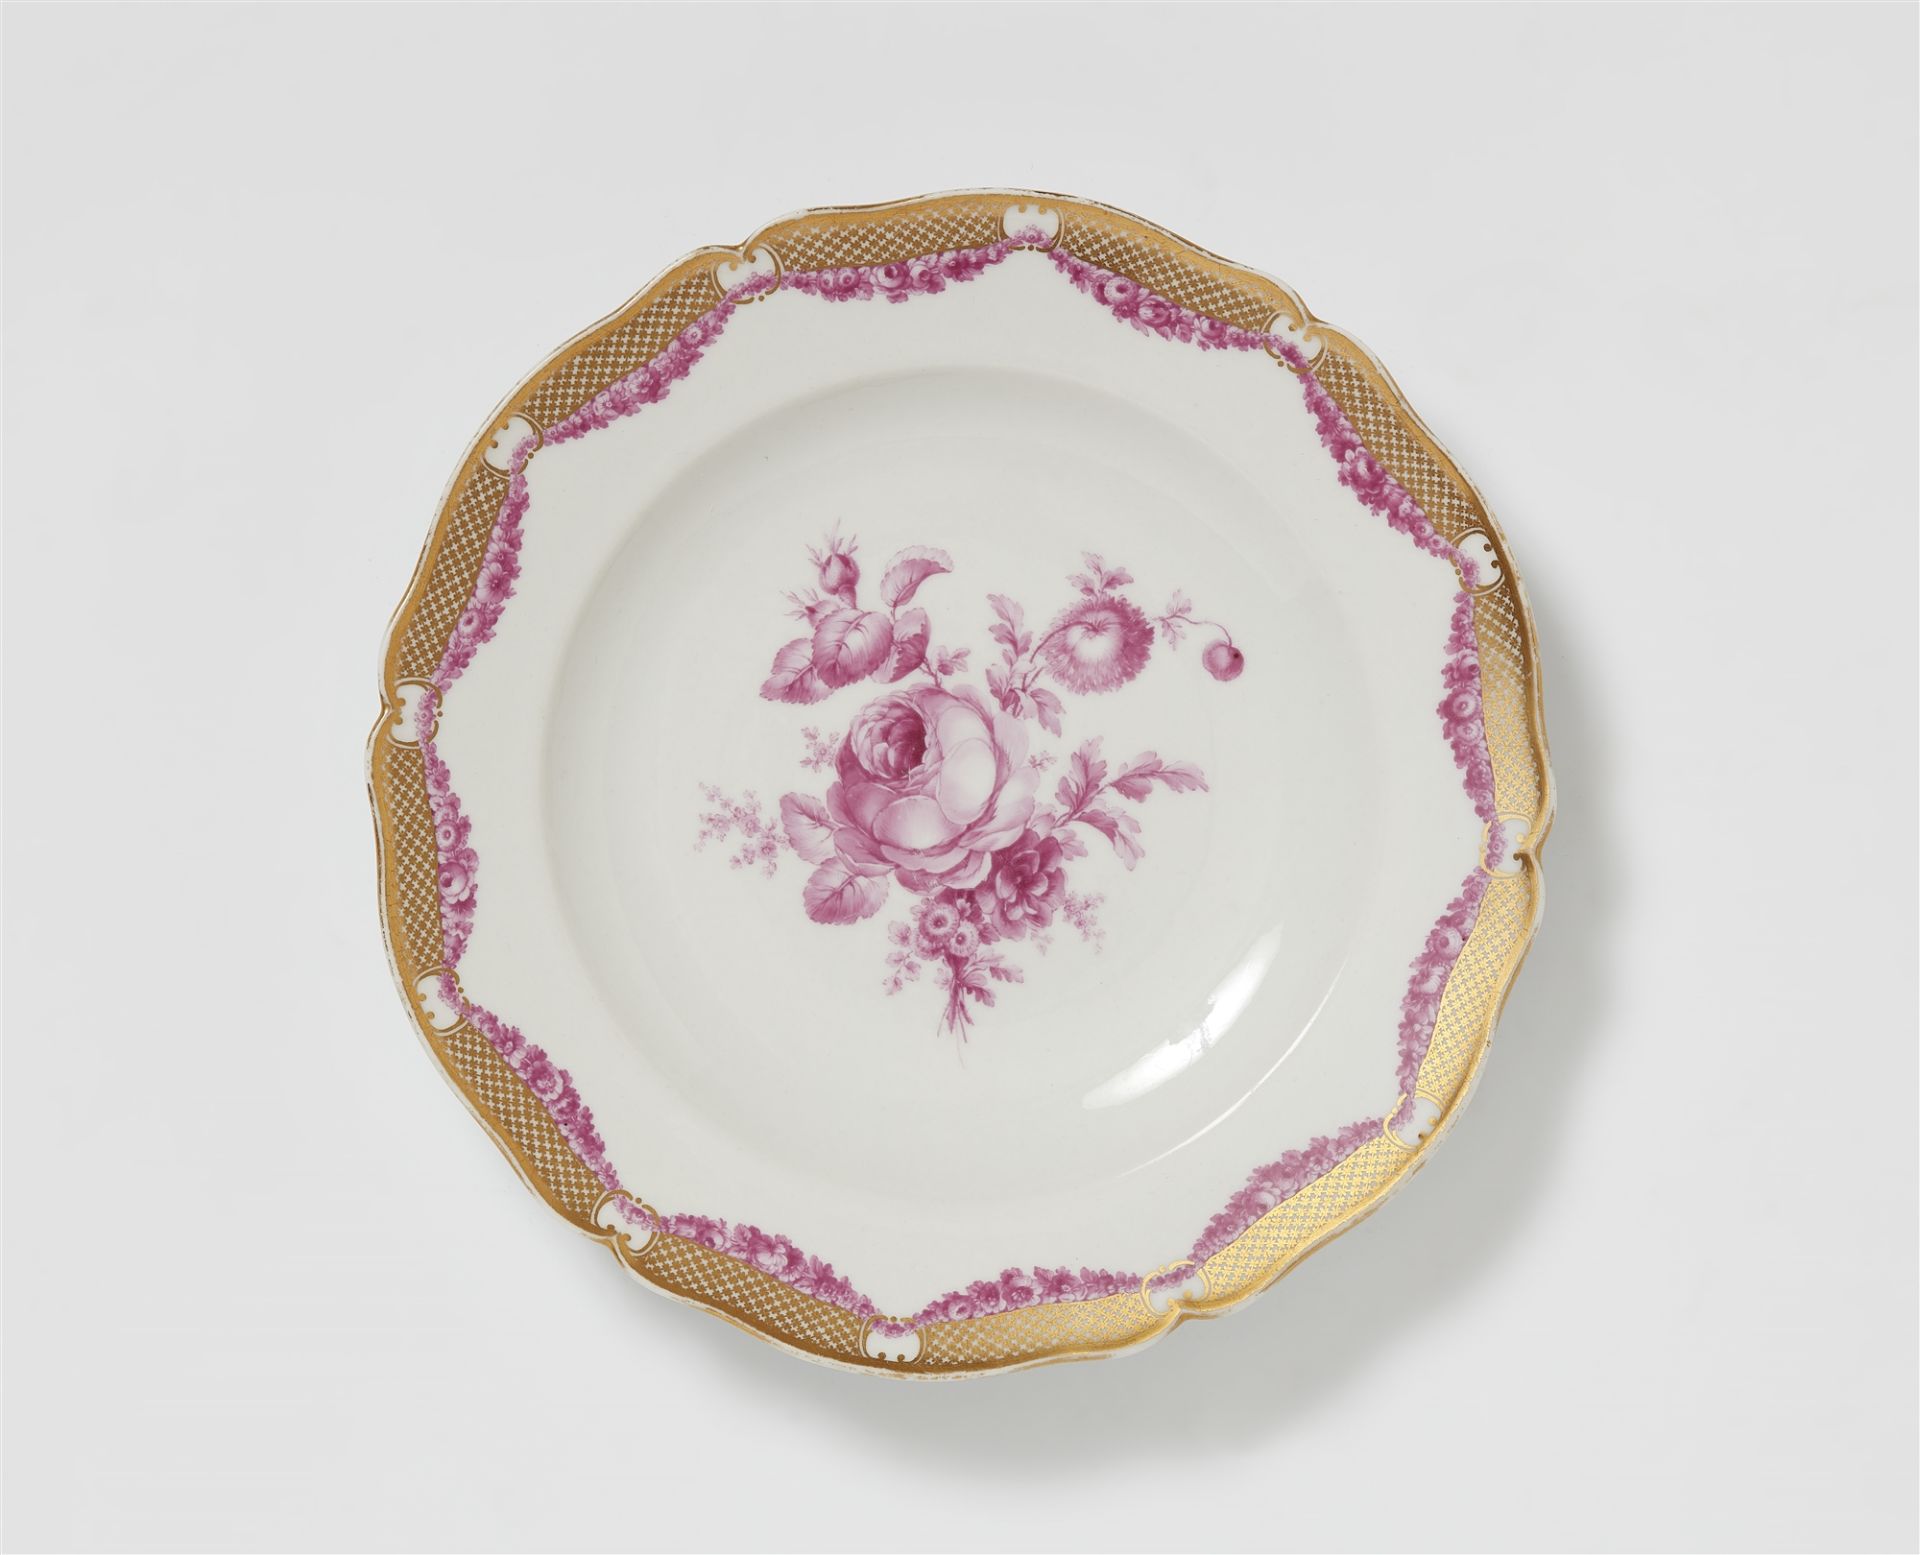 A Berlin KPM porcelain plate from the royal dinner service with purple flowers